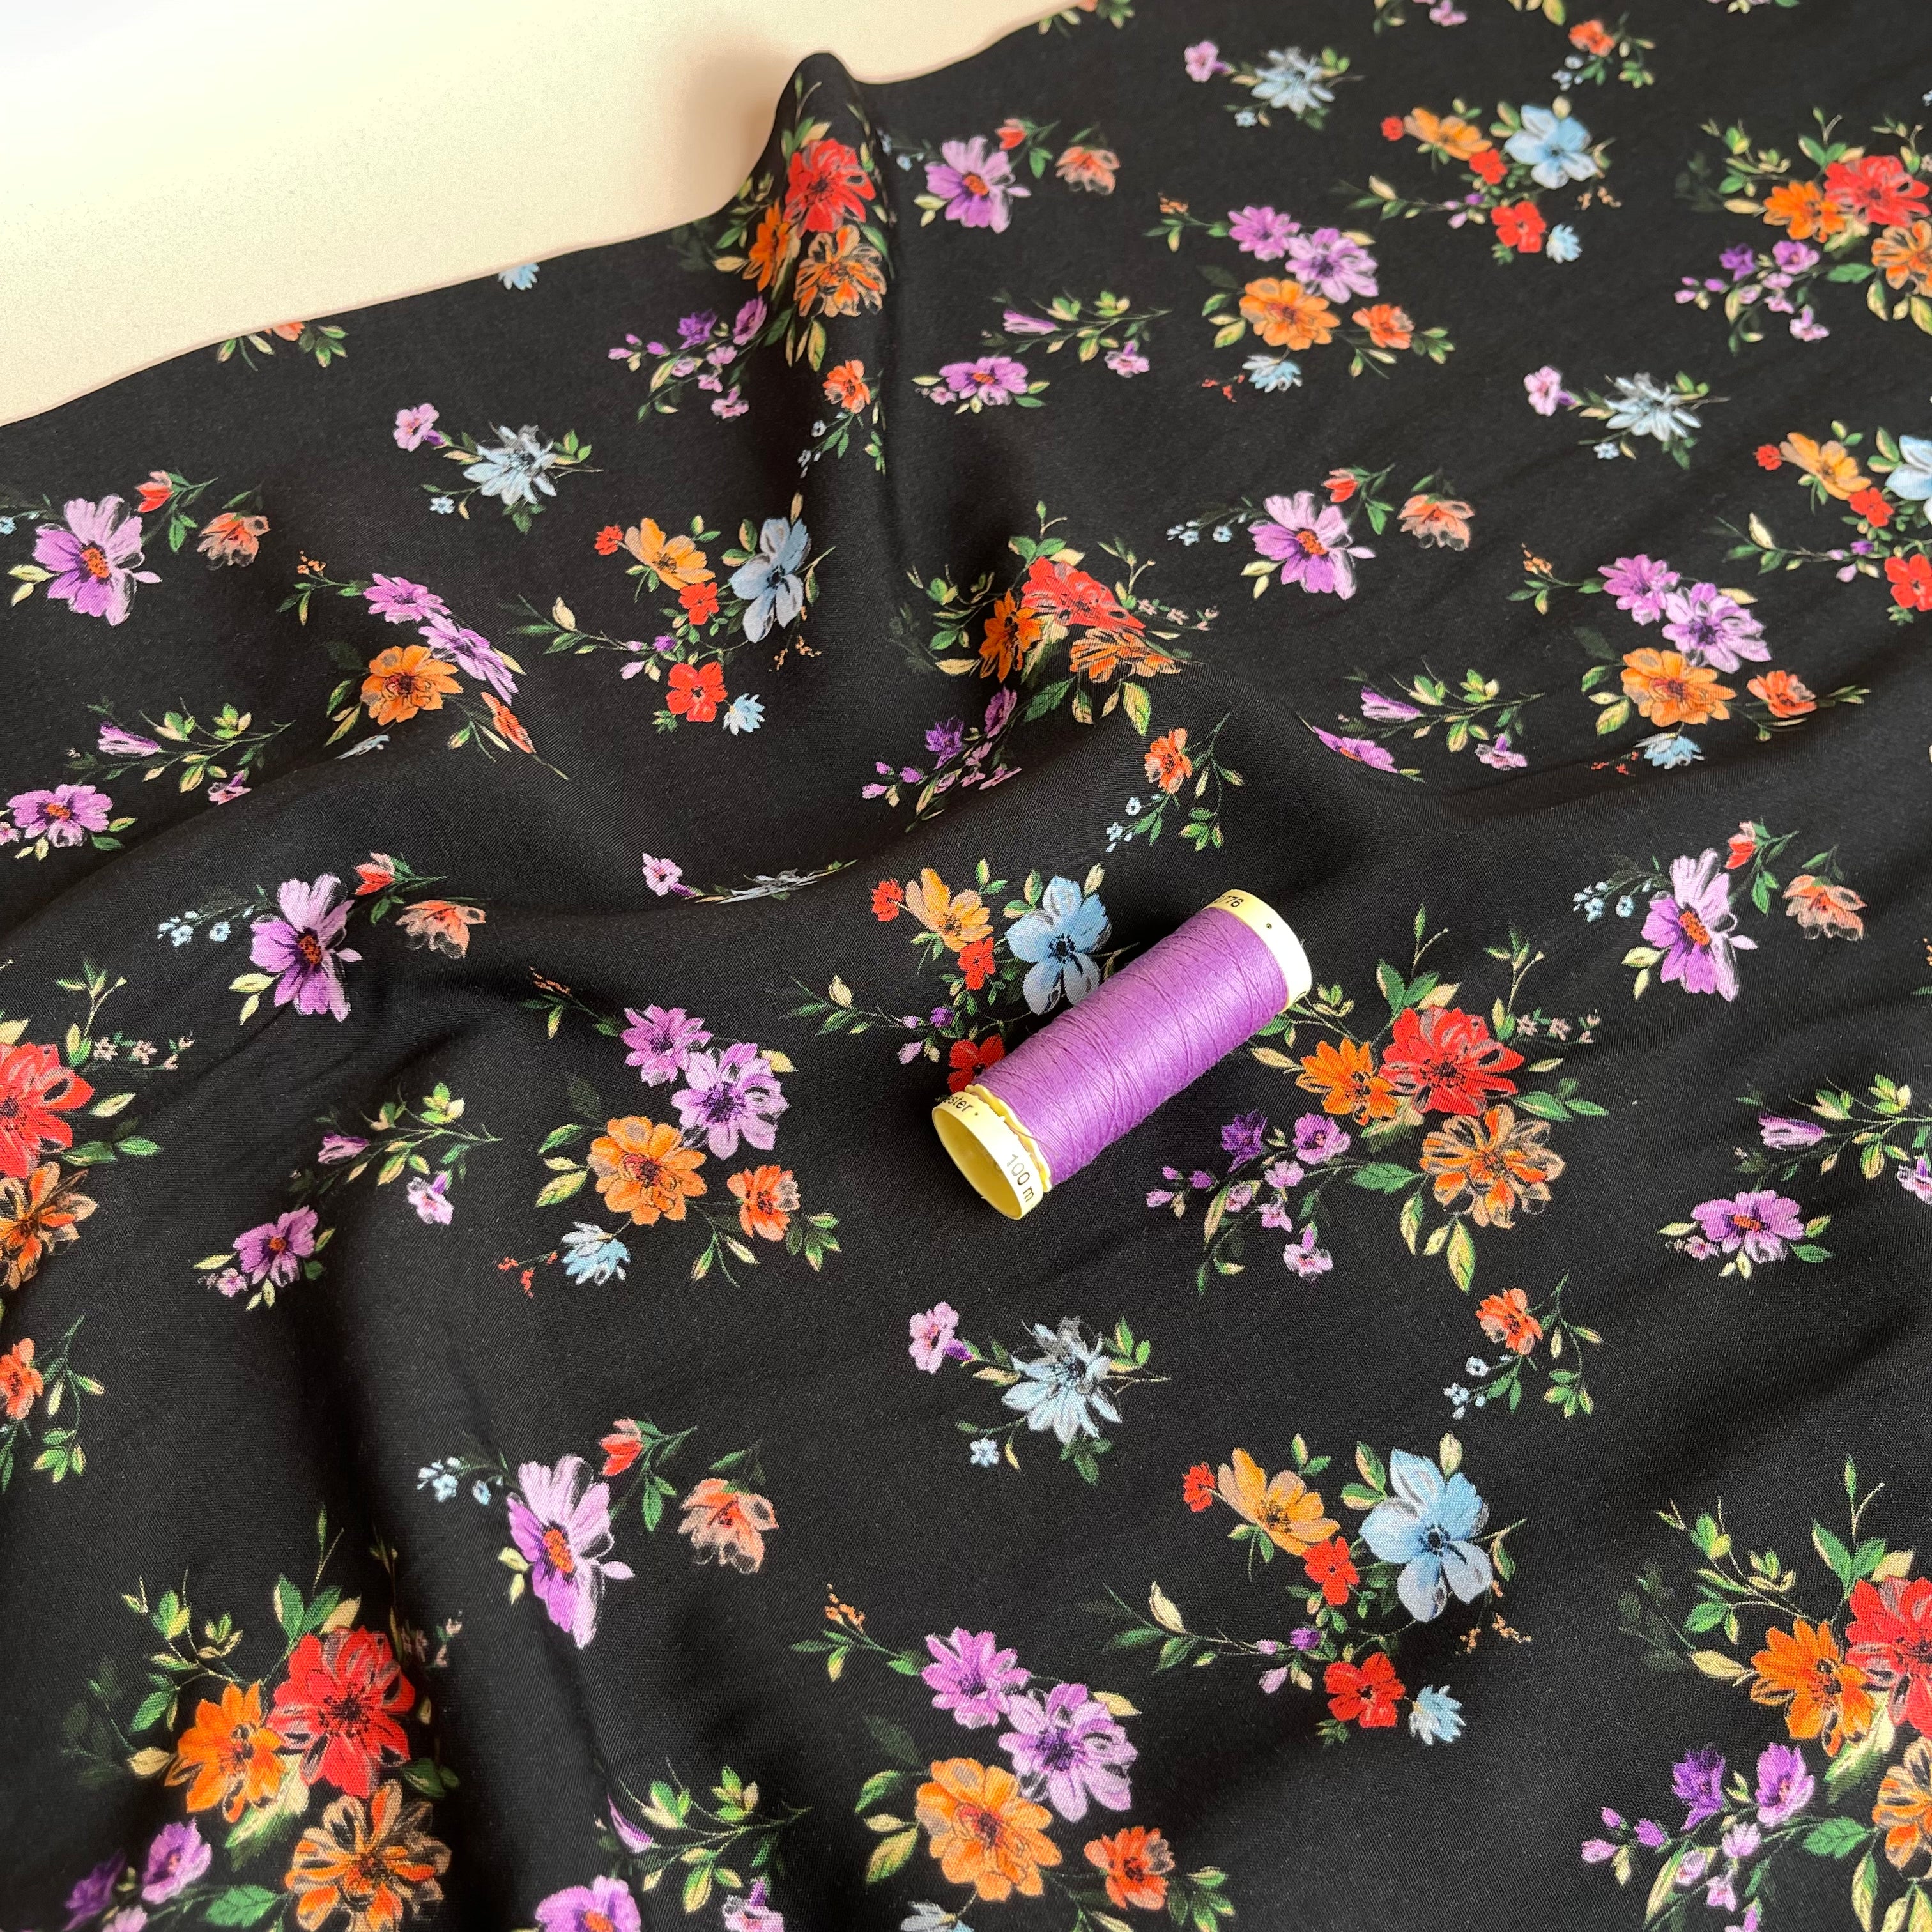 Flower Bouquets on Black Viscose Fabric